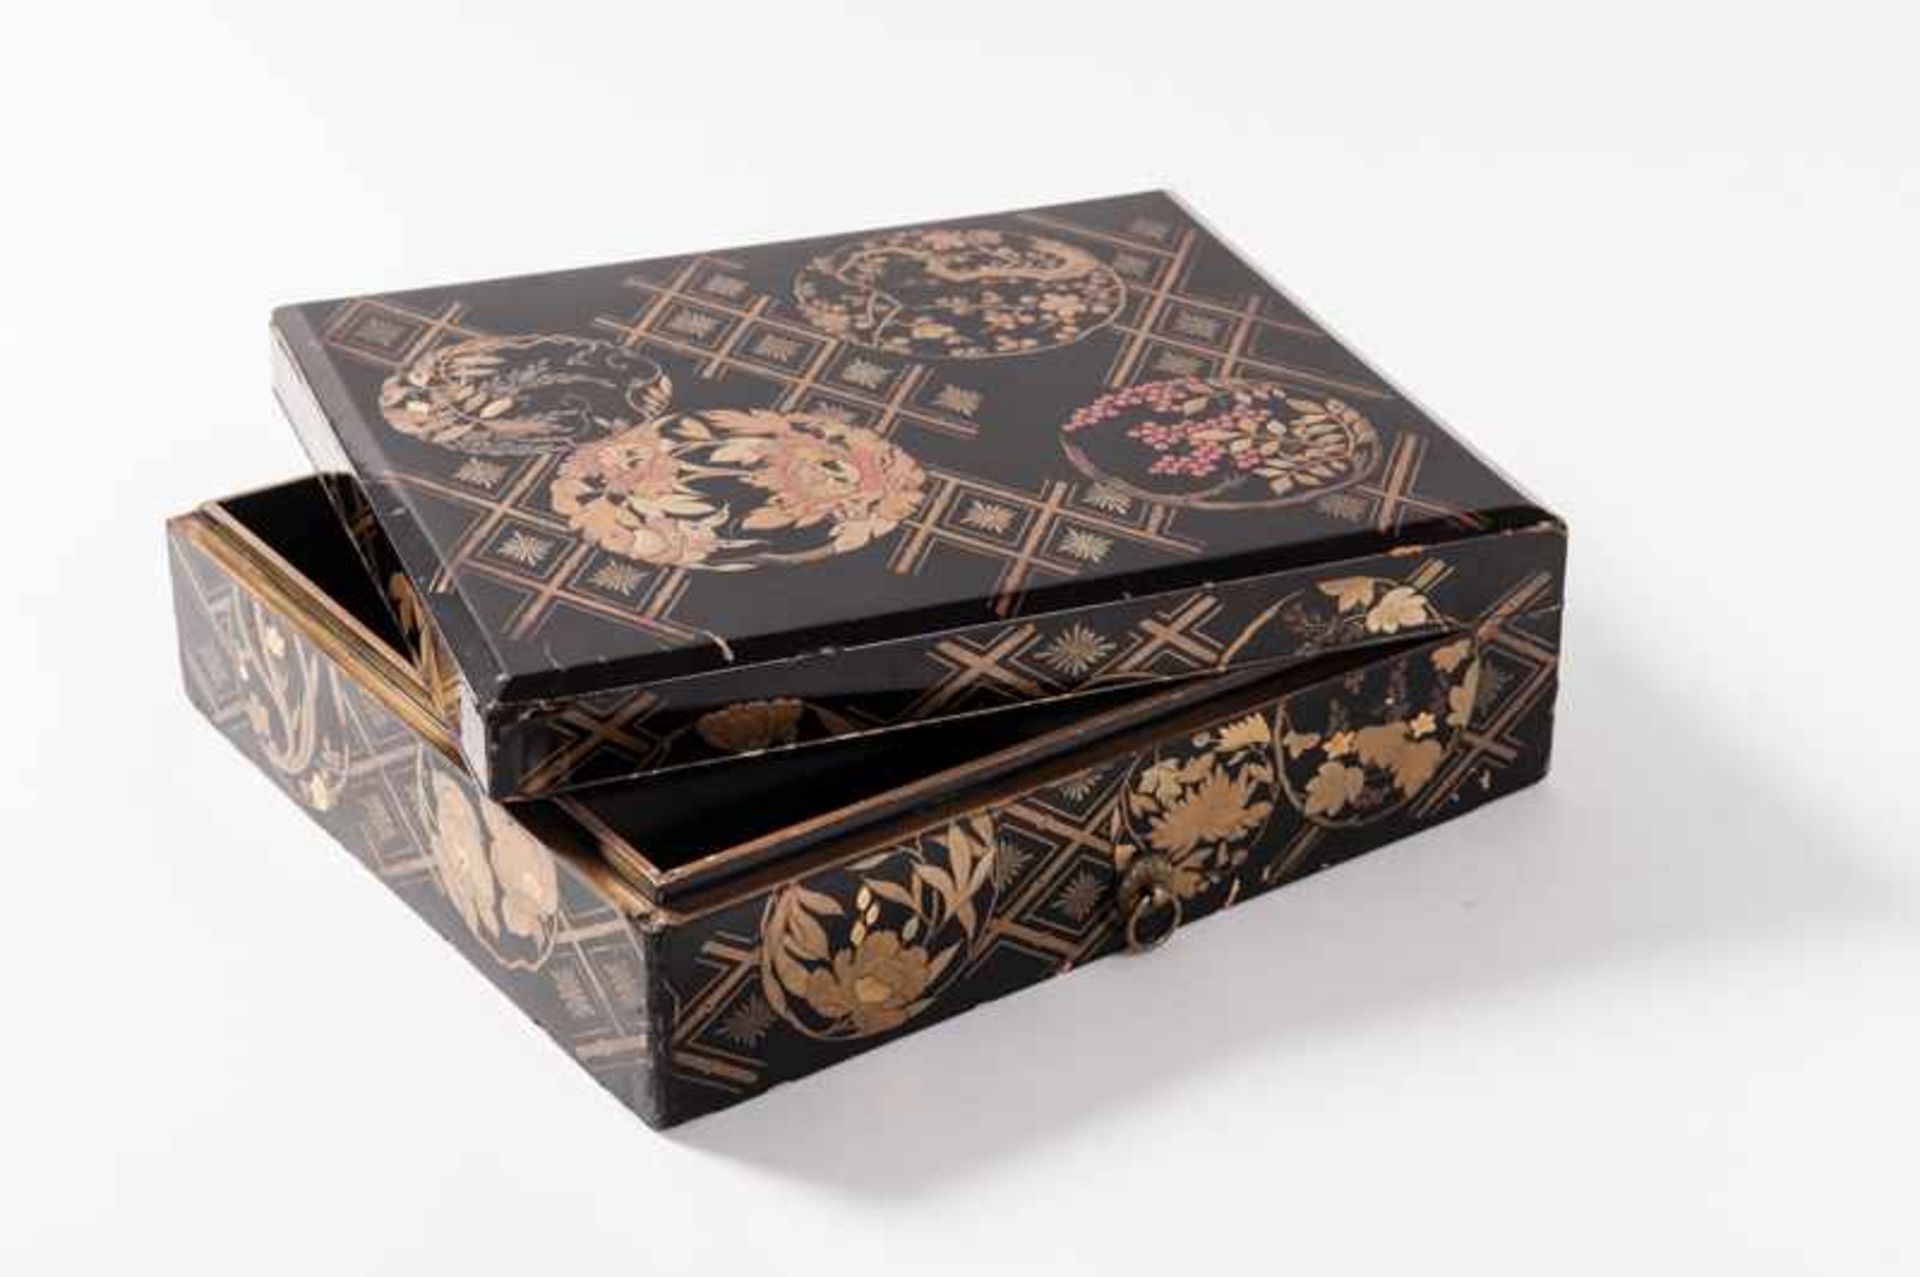 A LARGE DECORATIVE URUSHI LACQUER BOX WITH GOLD Wood, urushi lacquer. Japan, 19th cent.Condition - Image 3 of 4